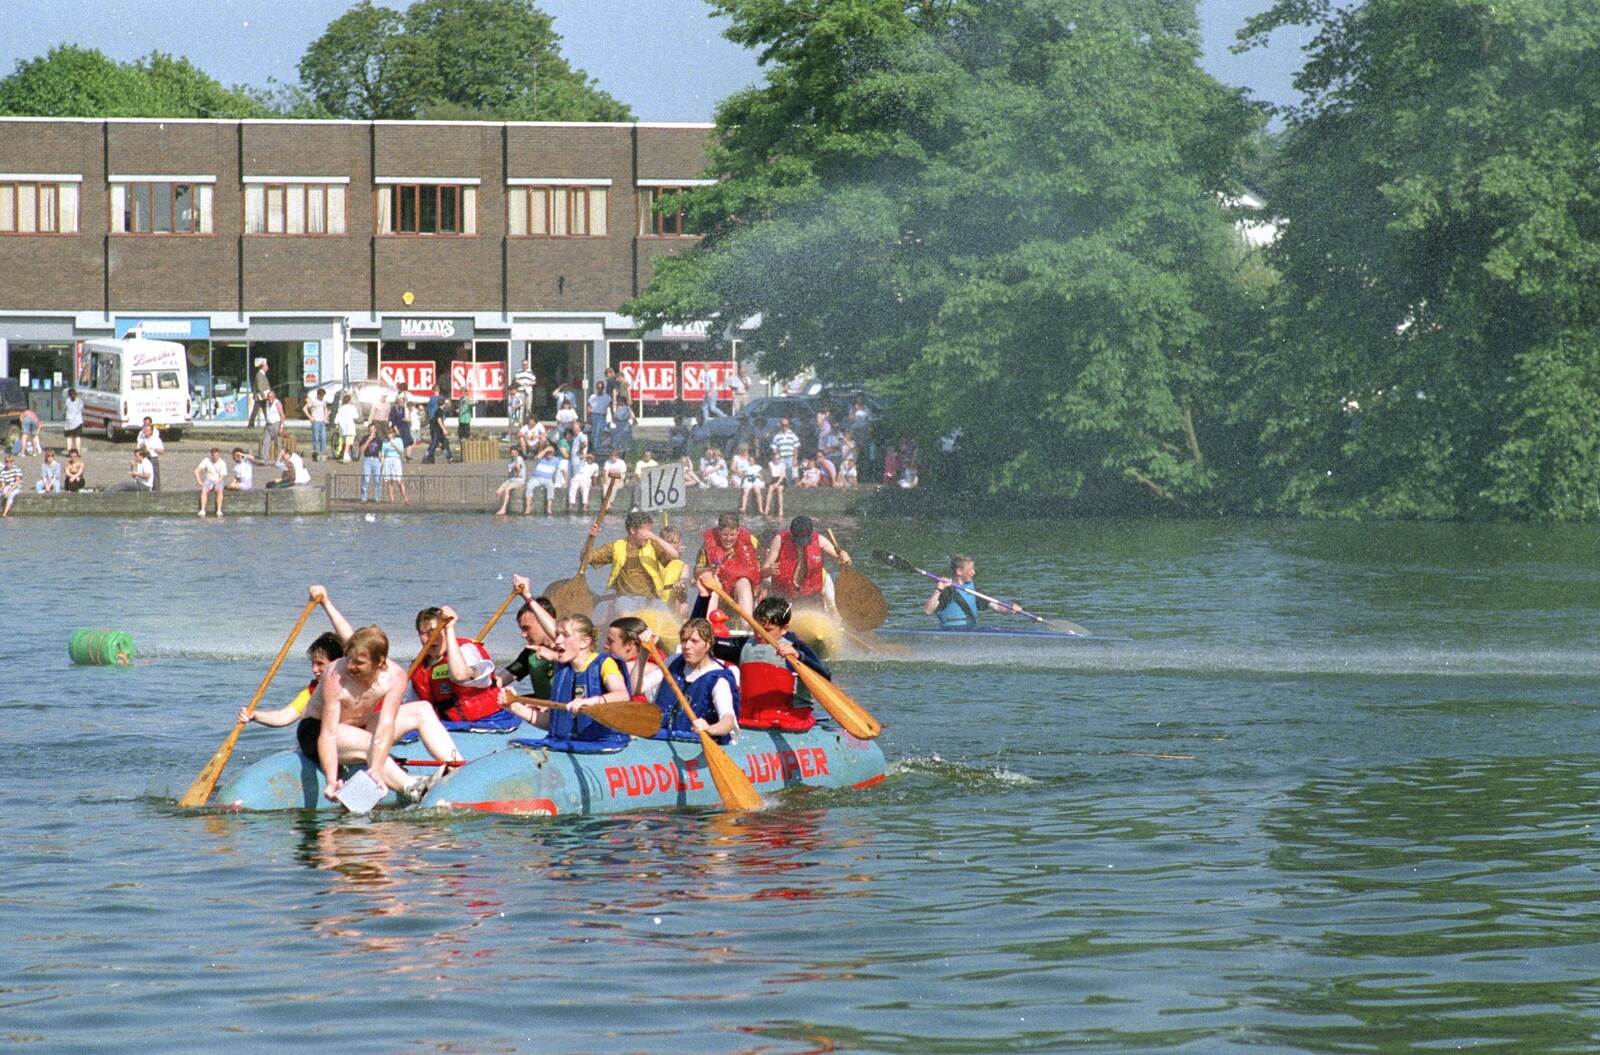 A firehose sprays the rafts from The Diss Raft Race, Diss Mere, Norfolk - 6th July 1991